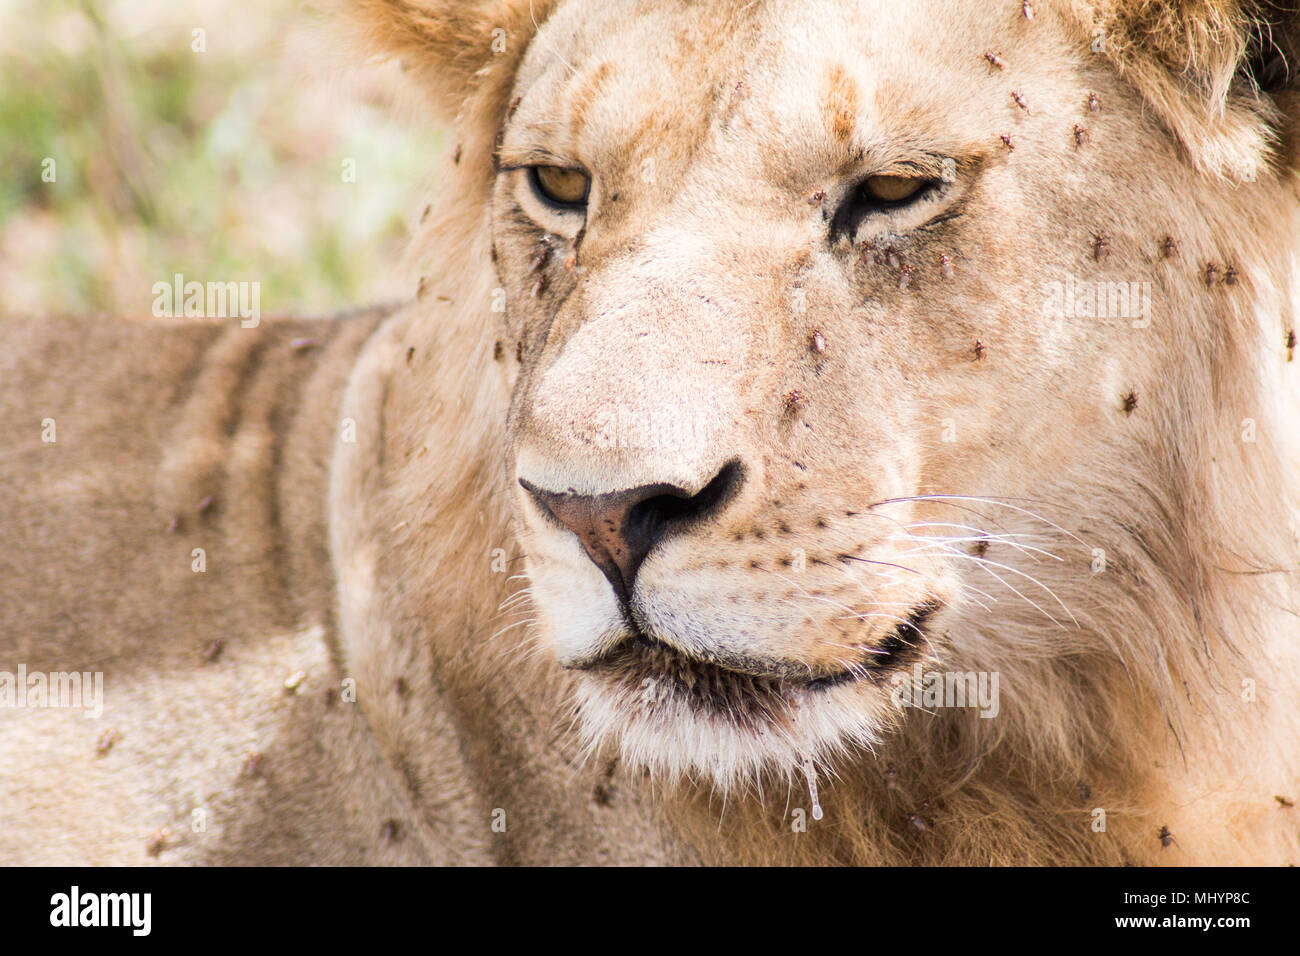 close up view of lioness Stock Photo